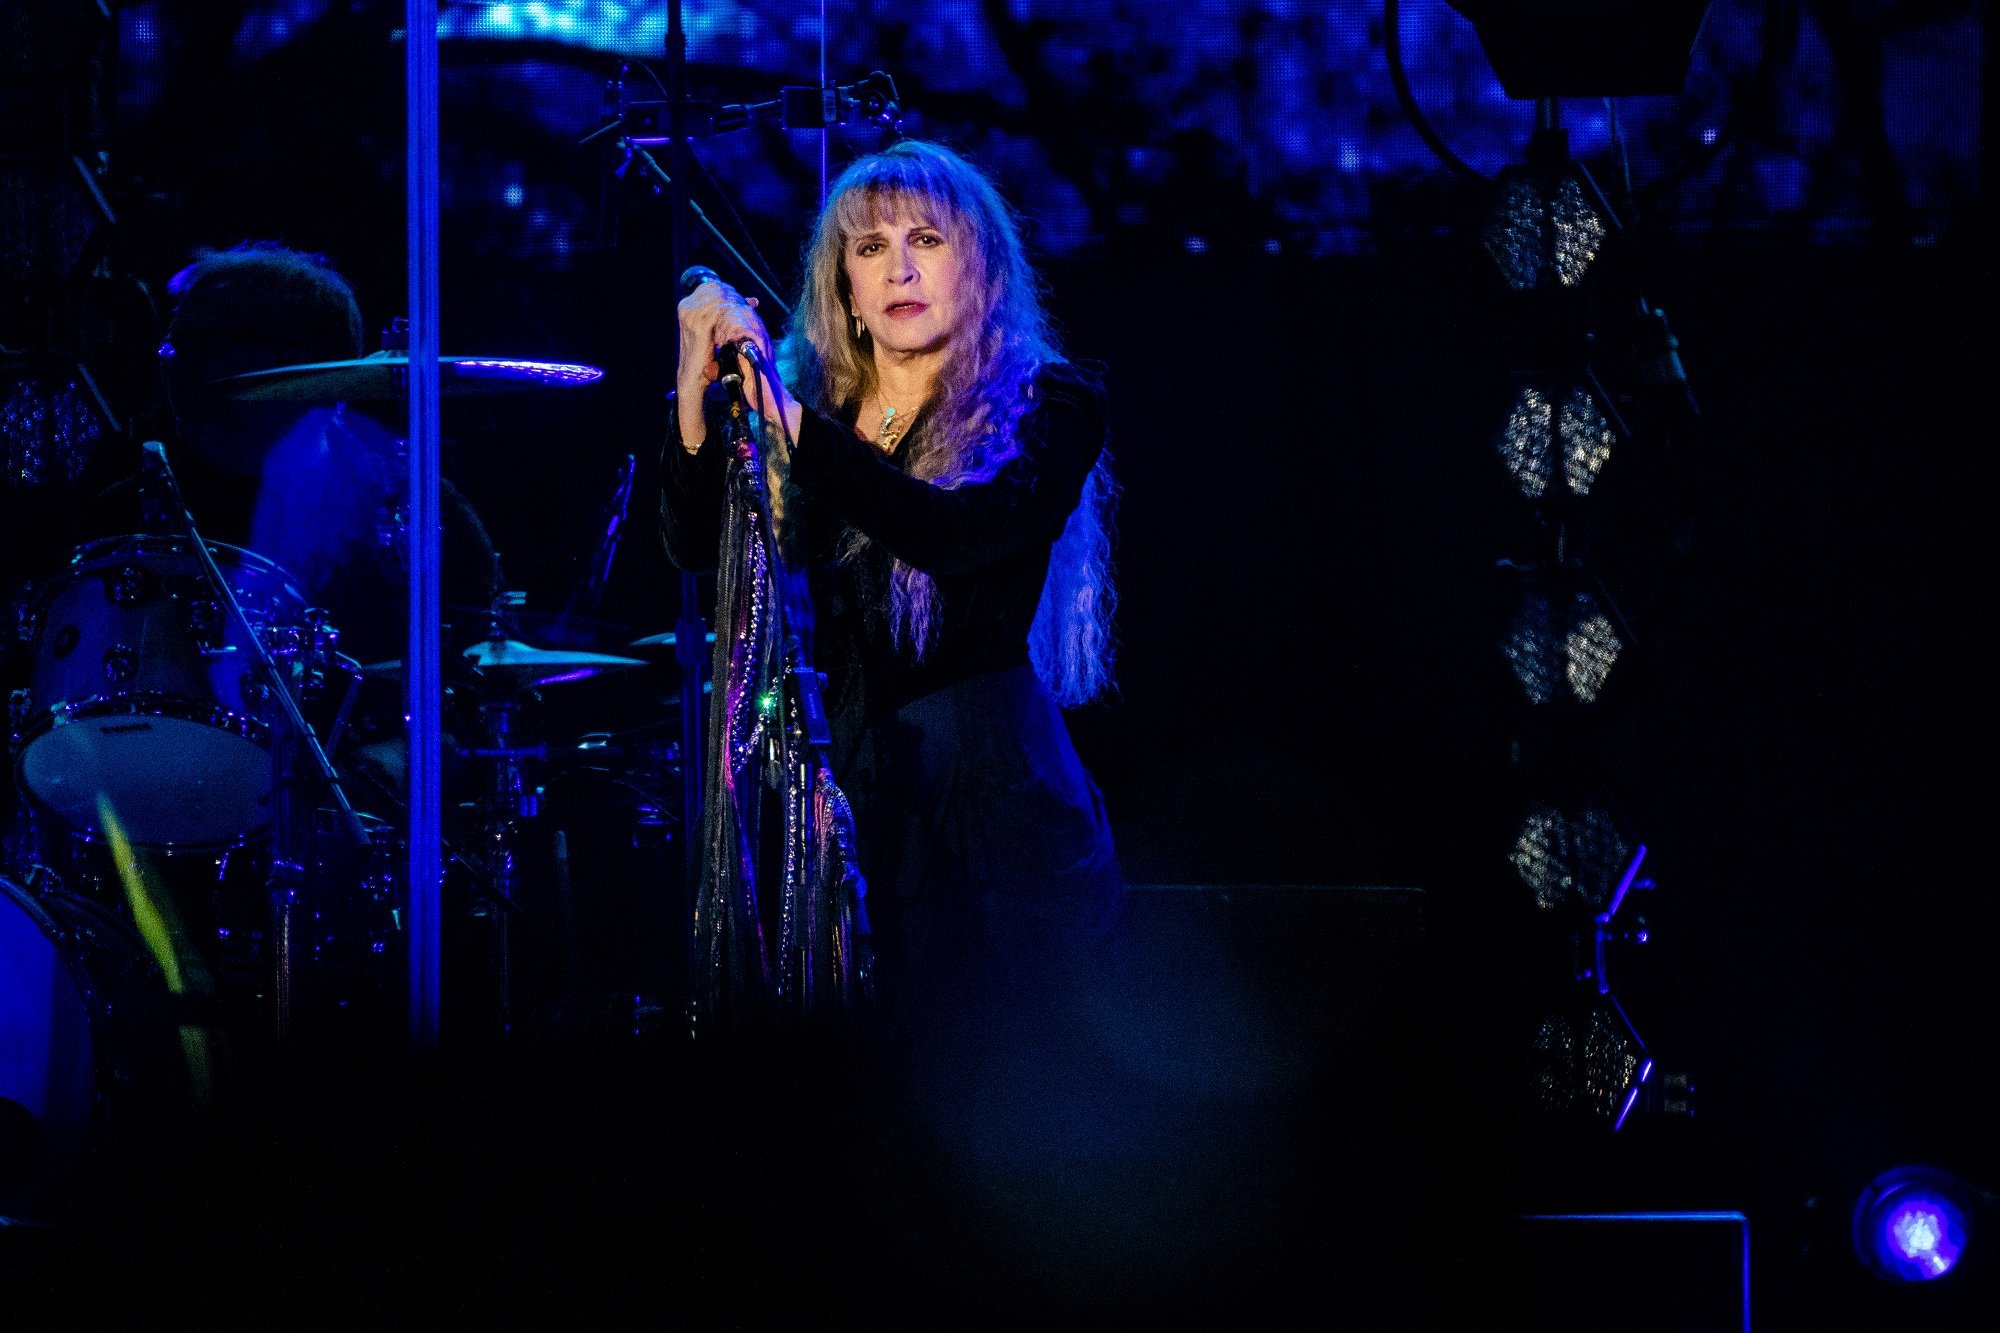 The Romance That Inspired ‘Rooms on Fire’ and What It’s About, According to Stevie Nicks